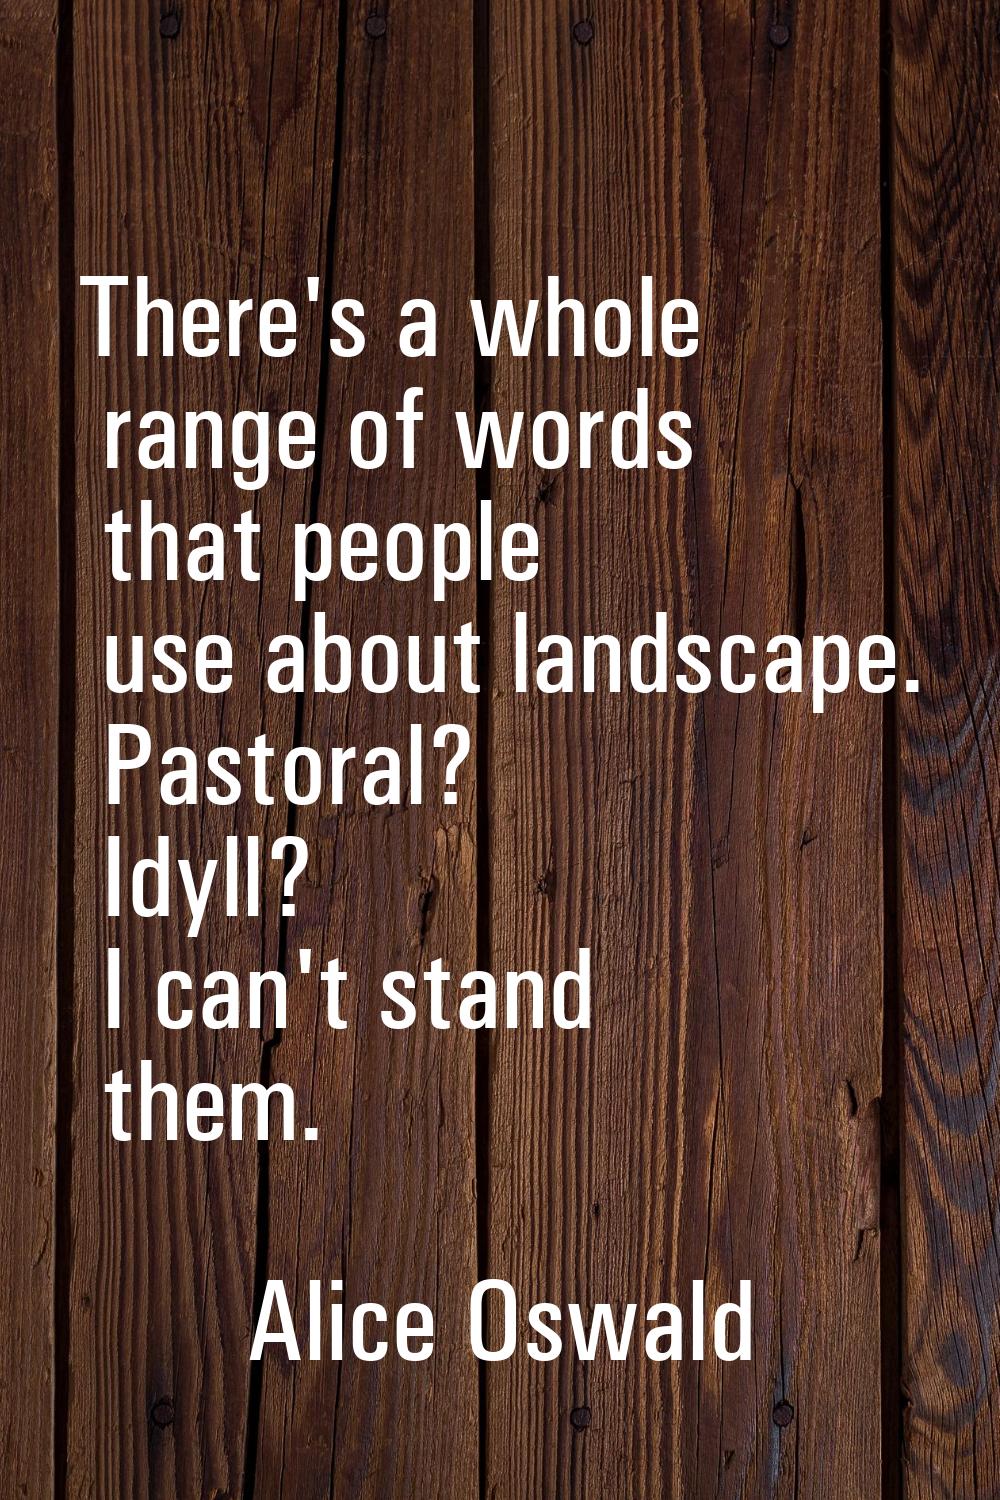 There's a whole range of words that people use about landscape. Pastoral? Idyll? I can't stand them